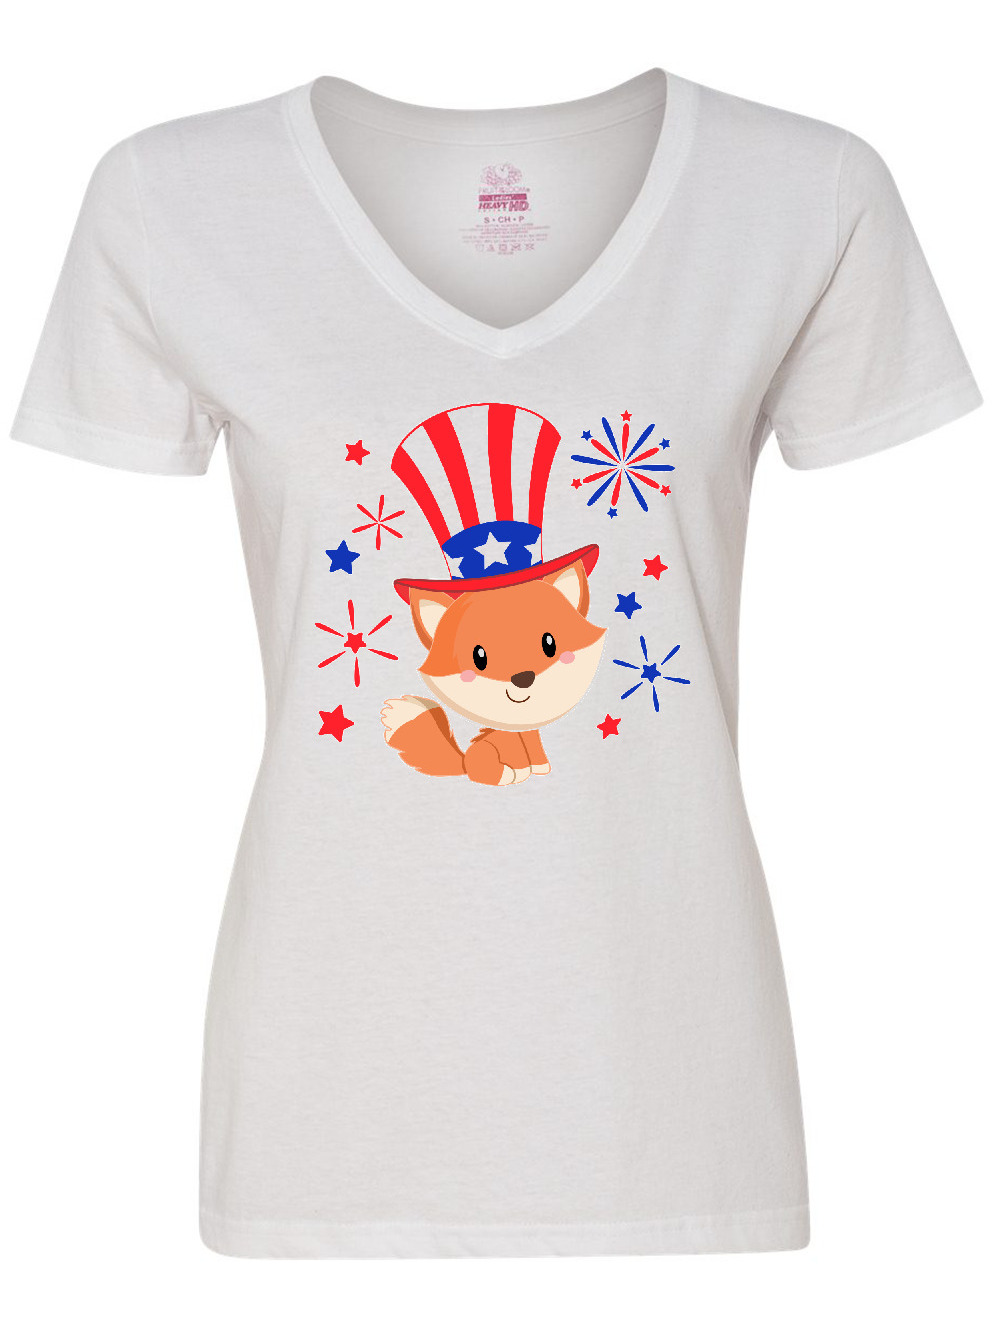 Inktastic 4th of July Cute Fox with Blue and Red Fireworks Women's V-Neck T-Shirt - image 1 of 4